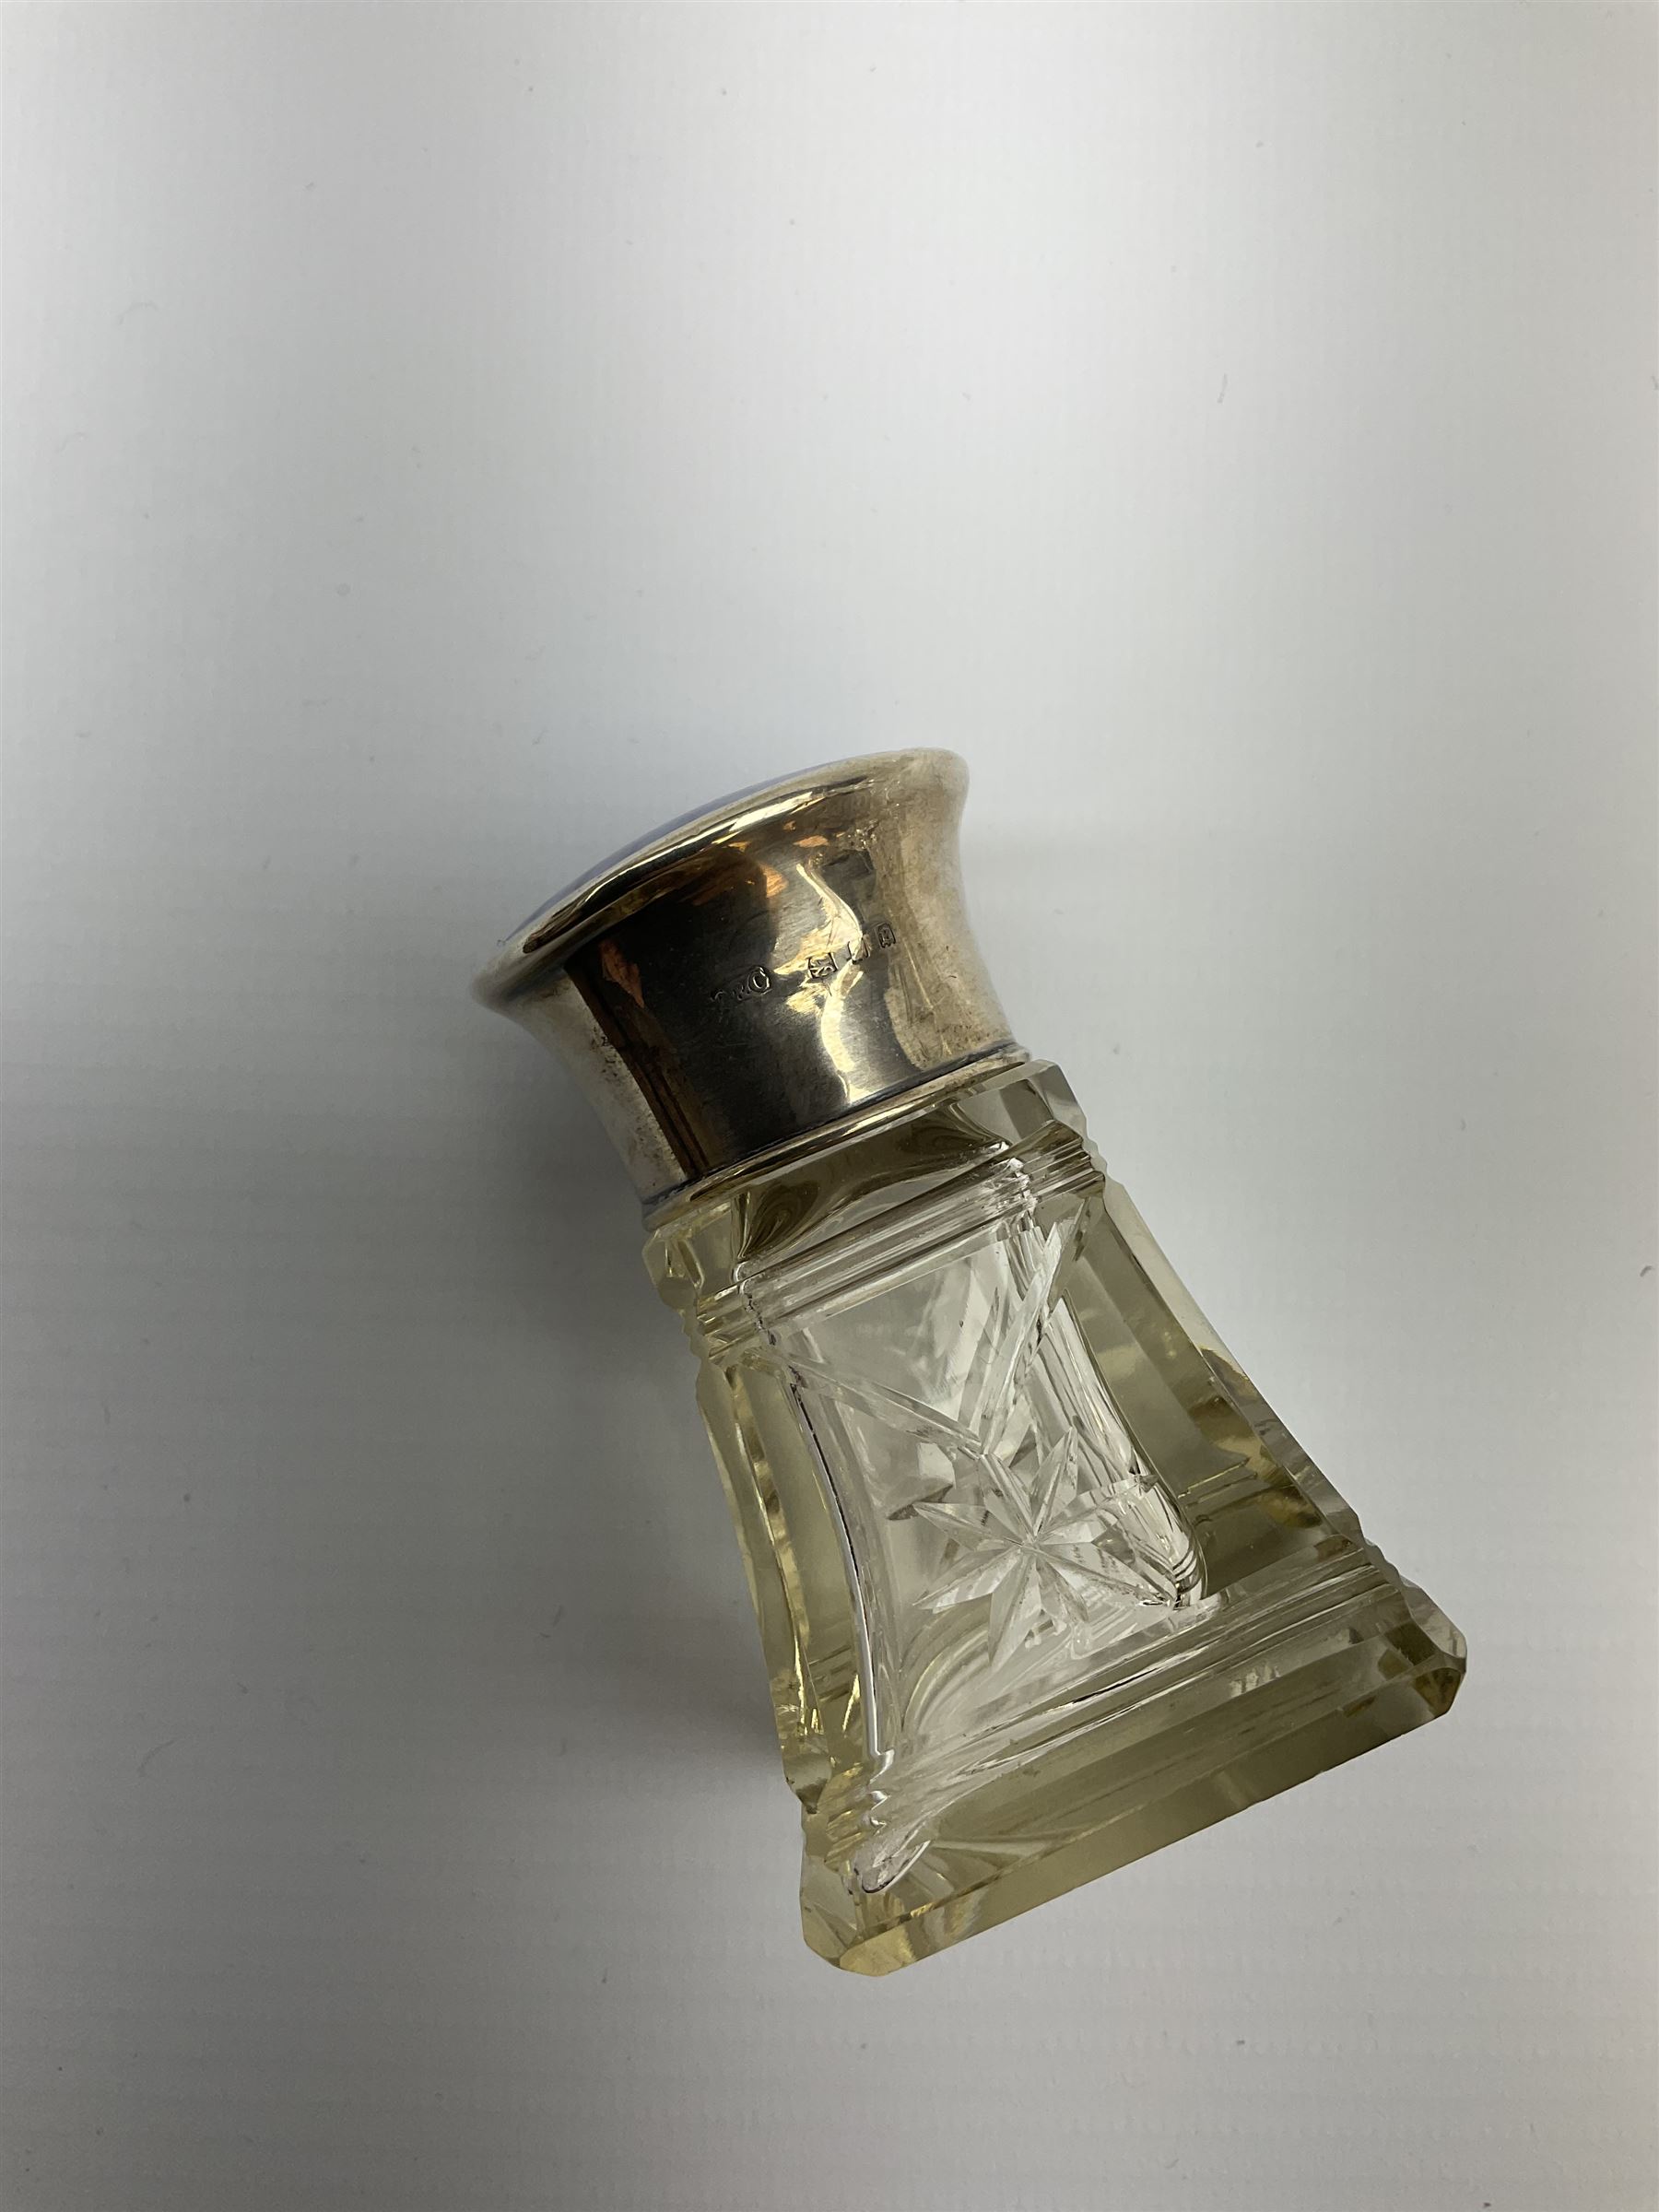 1920s cut glass scent cover with silver and enamel lid - Image 5 of 5